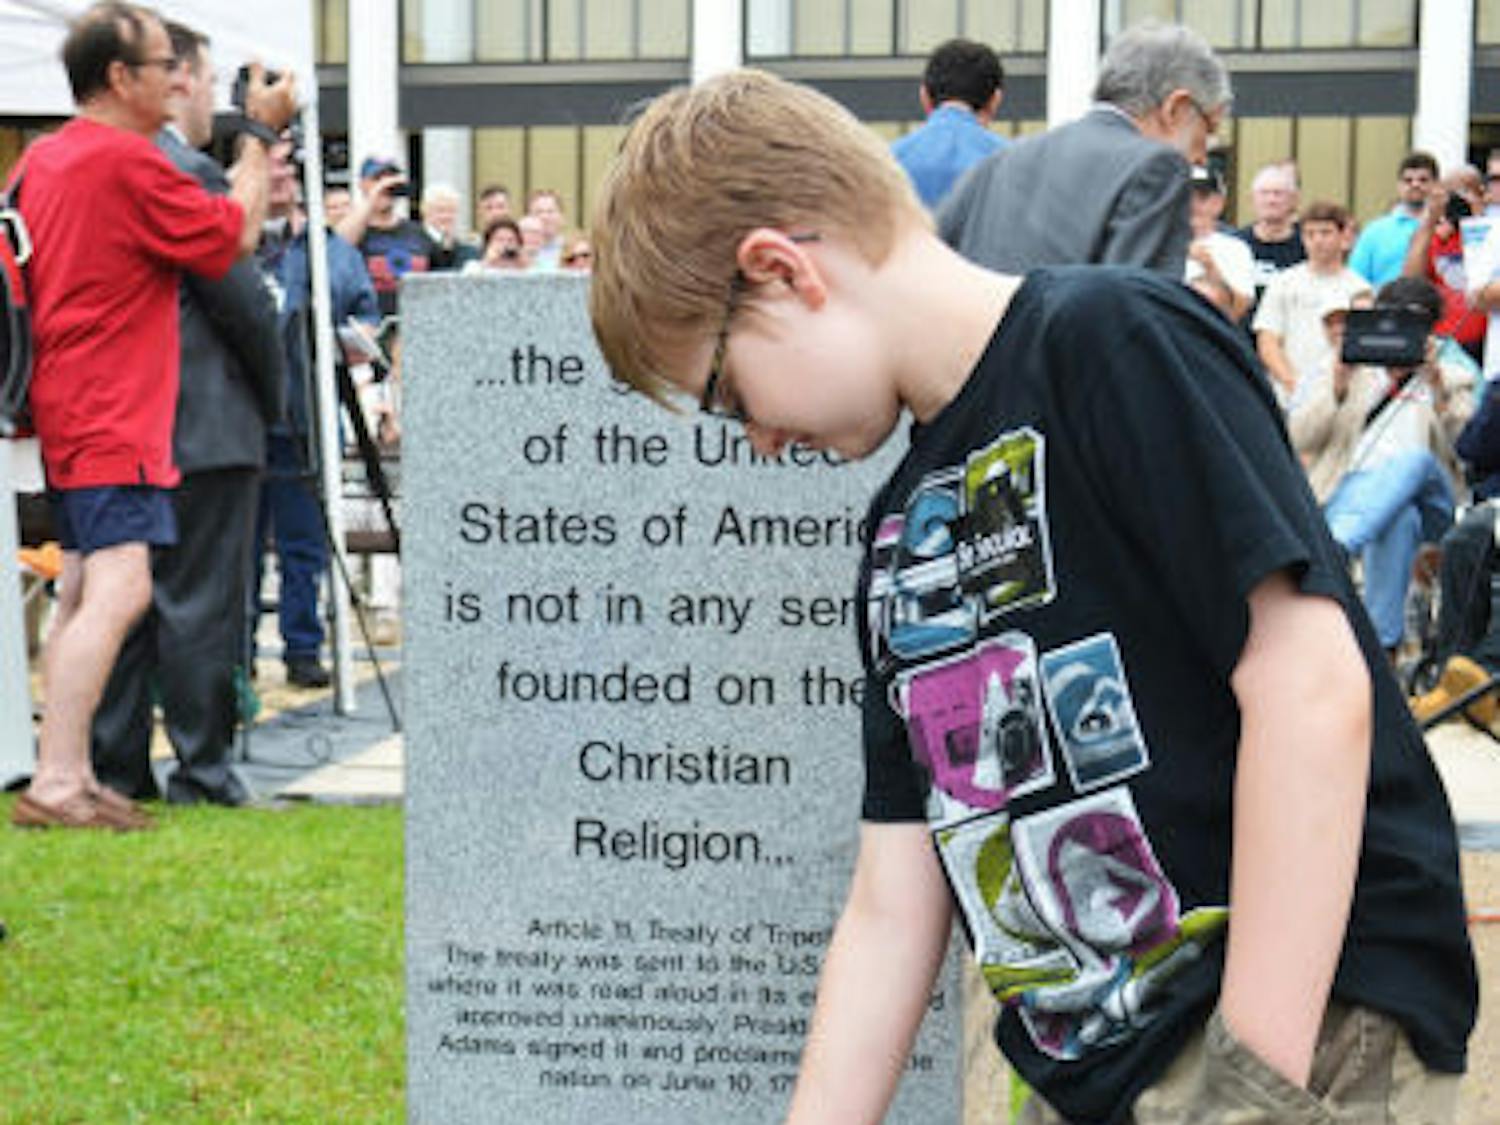 Chandler Allen, 10, of Orlando, was the first to sit on the newly revealed atheist monument outside the Bradford County Courthouse.
&nbsp;